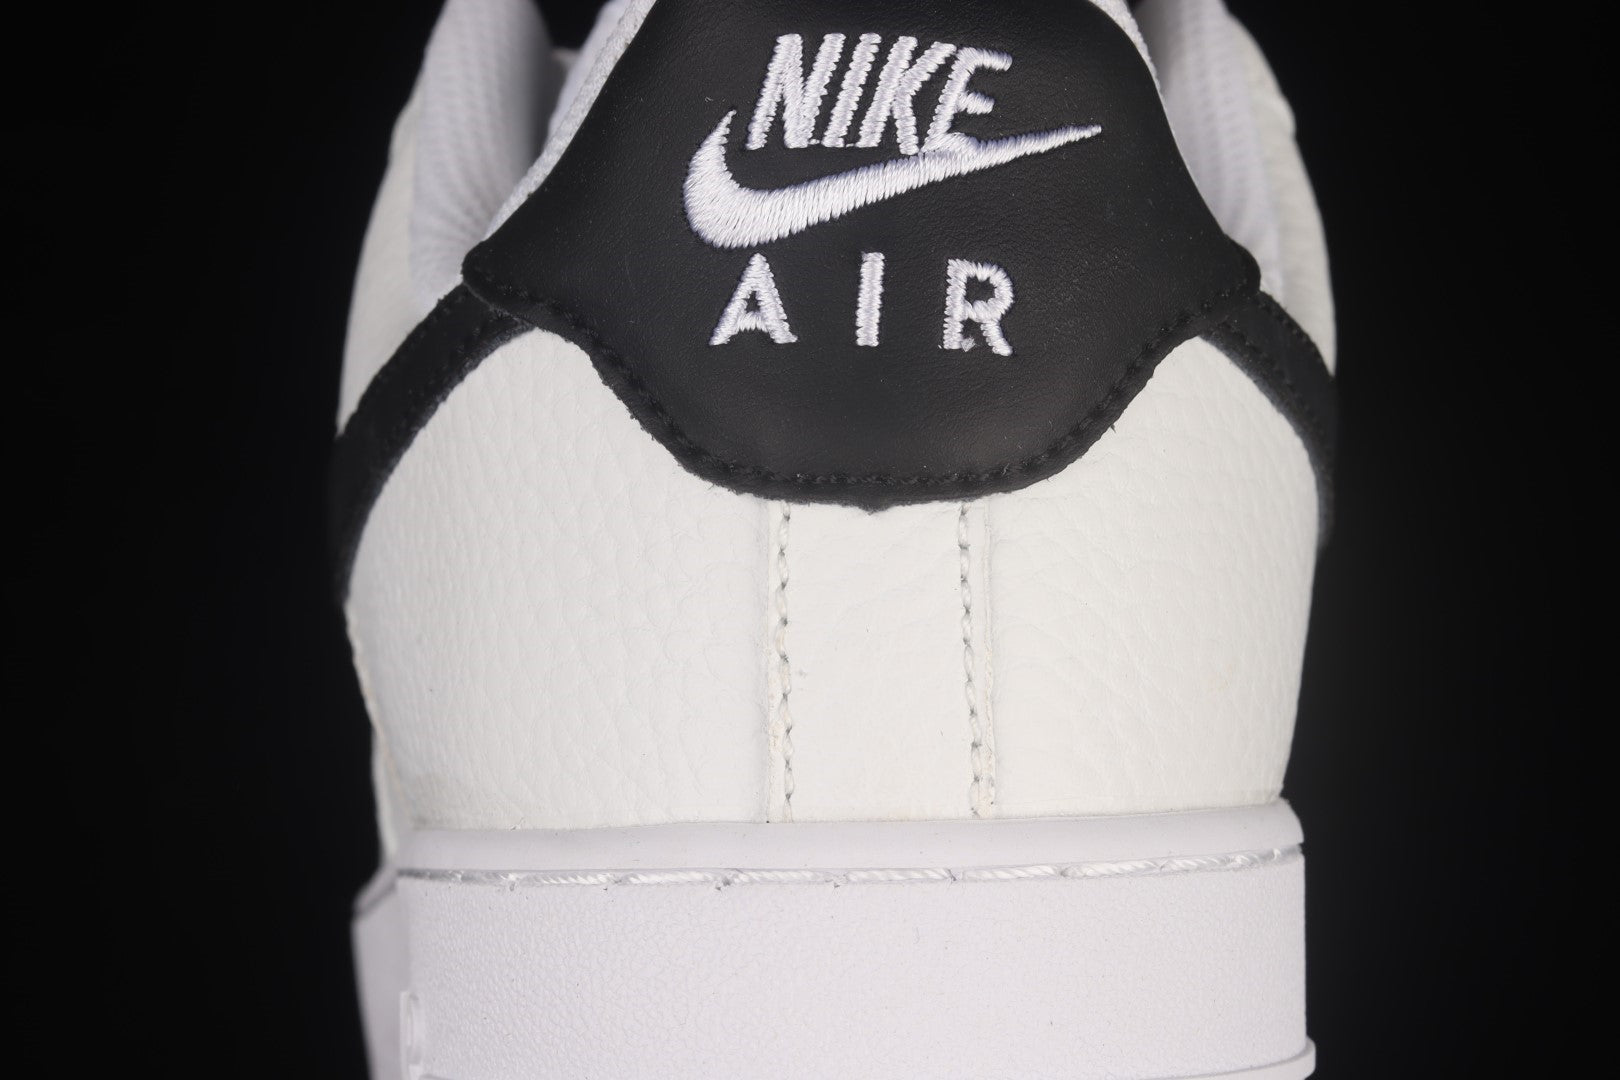 NikeMens Air Force 1 AF1 Low Pebbled Leather - "White Black"